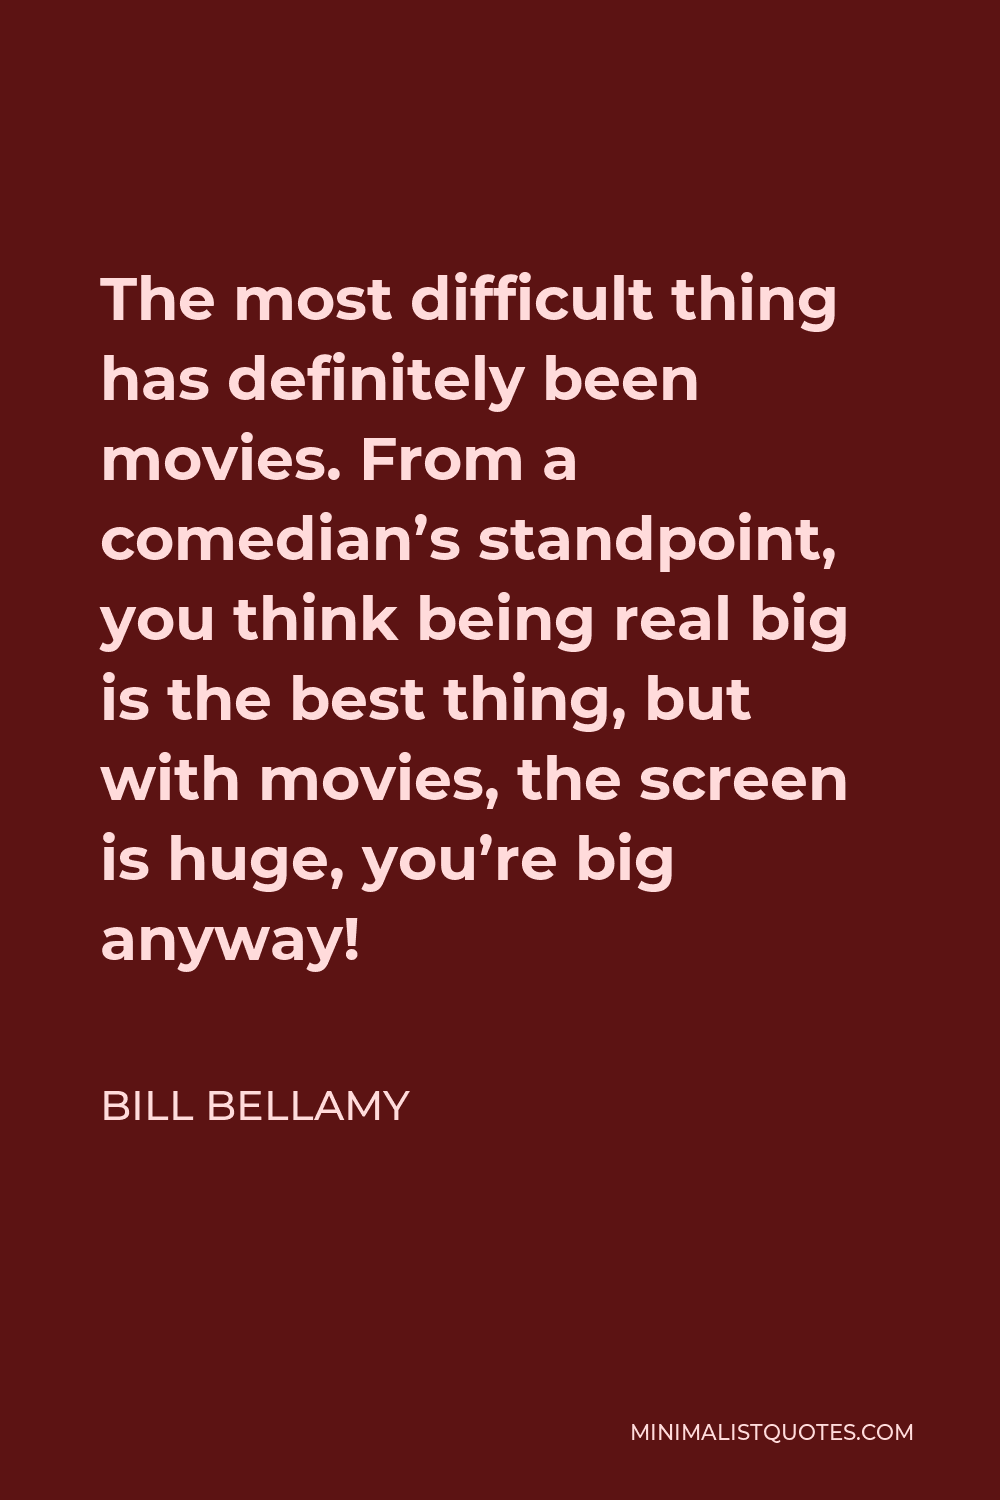 Bill Bellamy Quote - The most difficult thing has definitely been movies. From a comedian’s standpoint, you think being real big is the best thing, but with movies, the screen is huge, you’re big anyway!